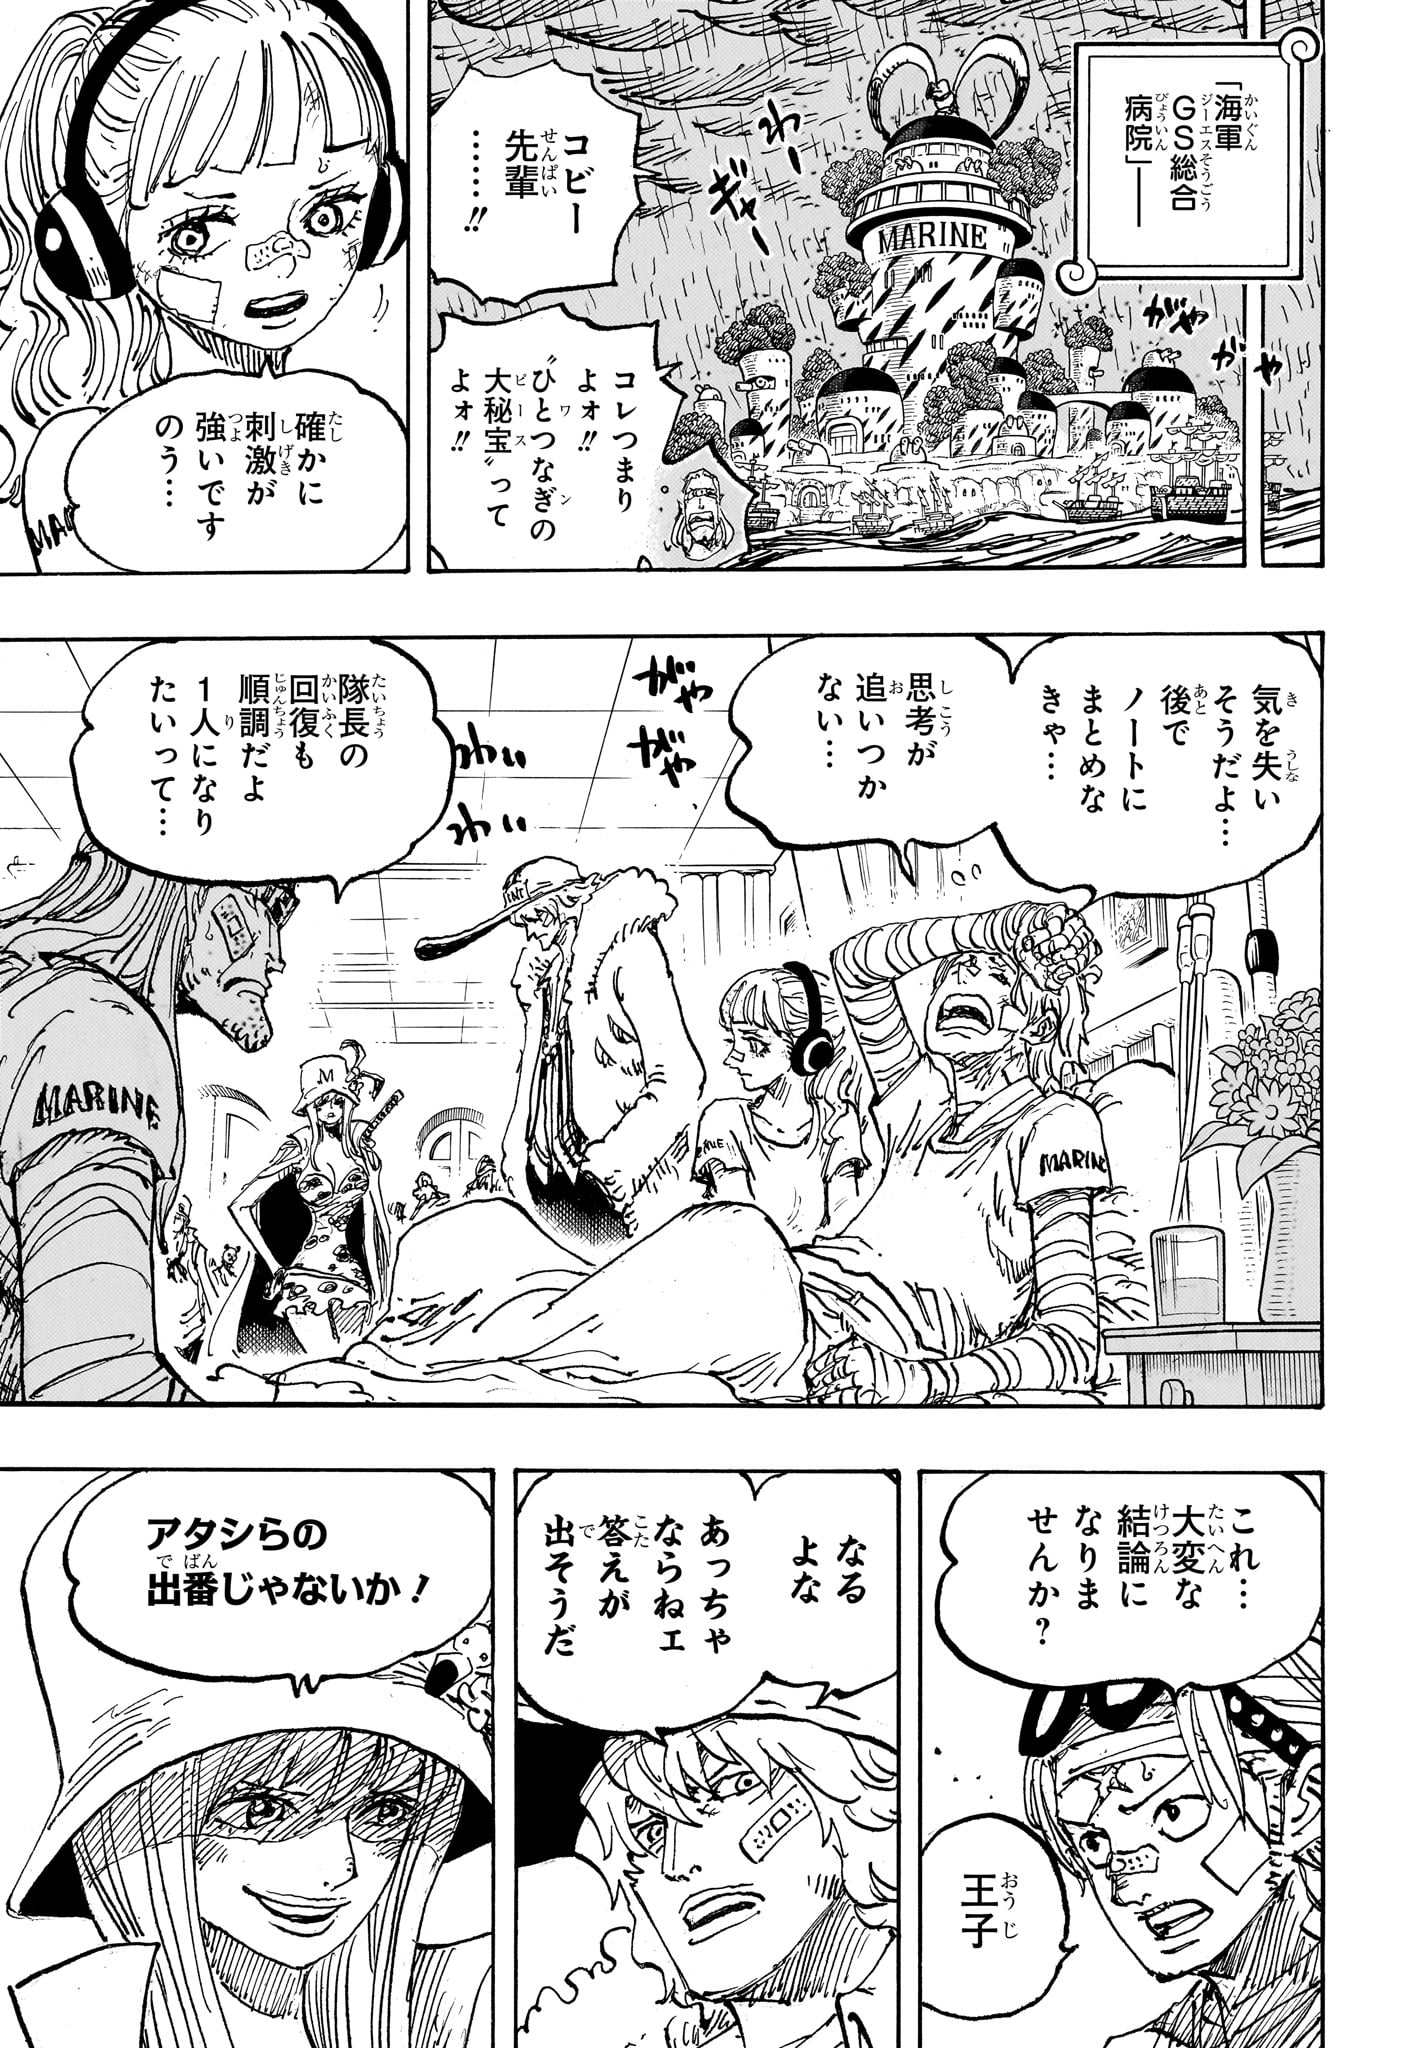 One Piece - Chapter 1117 - Page 3